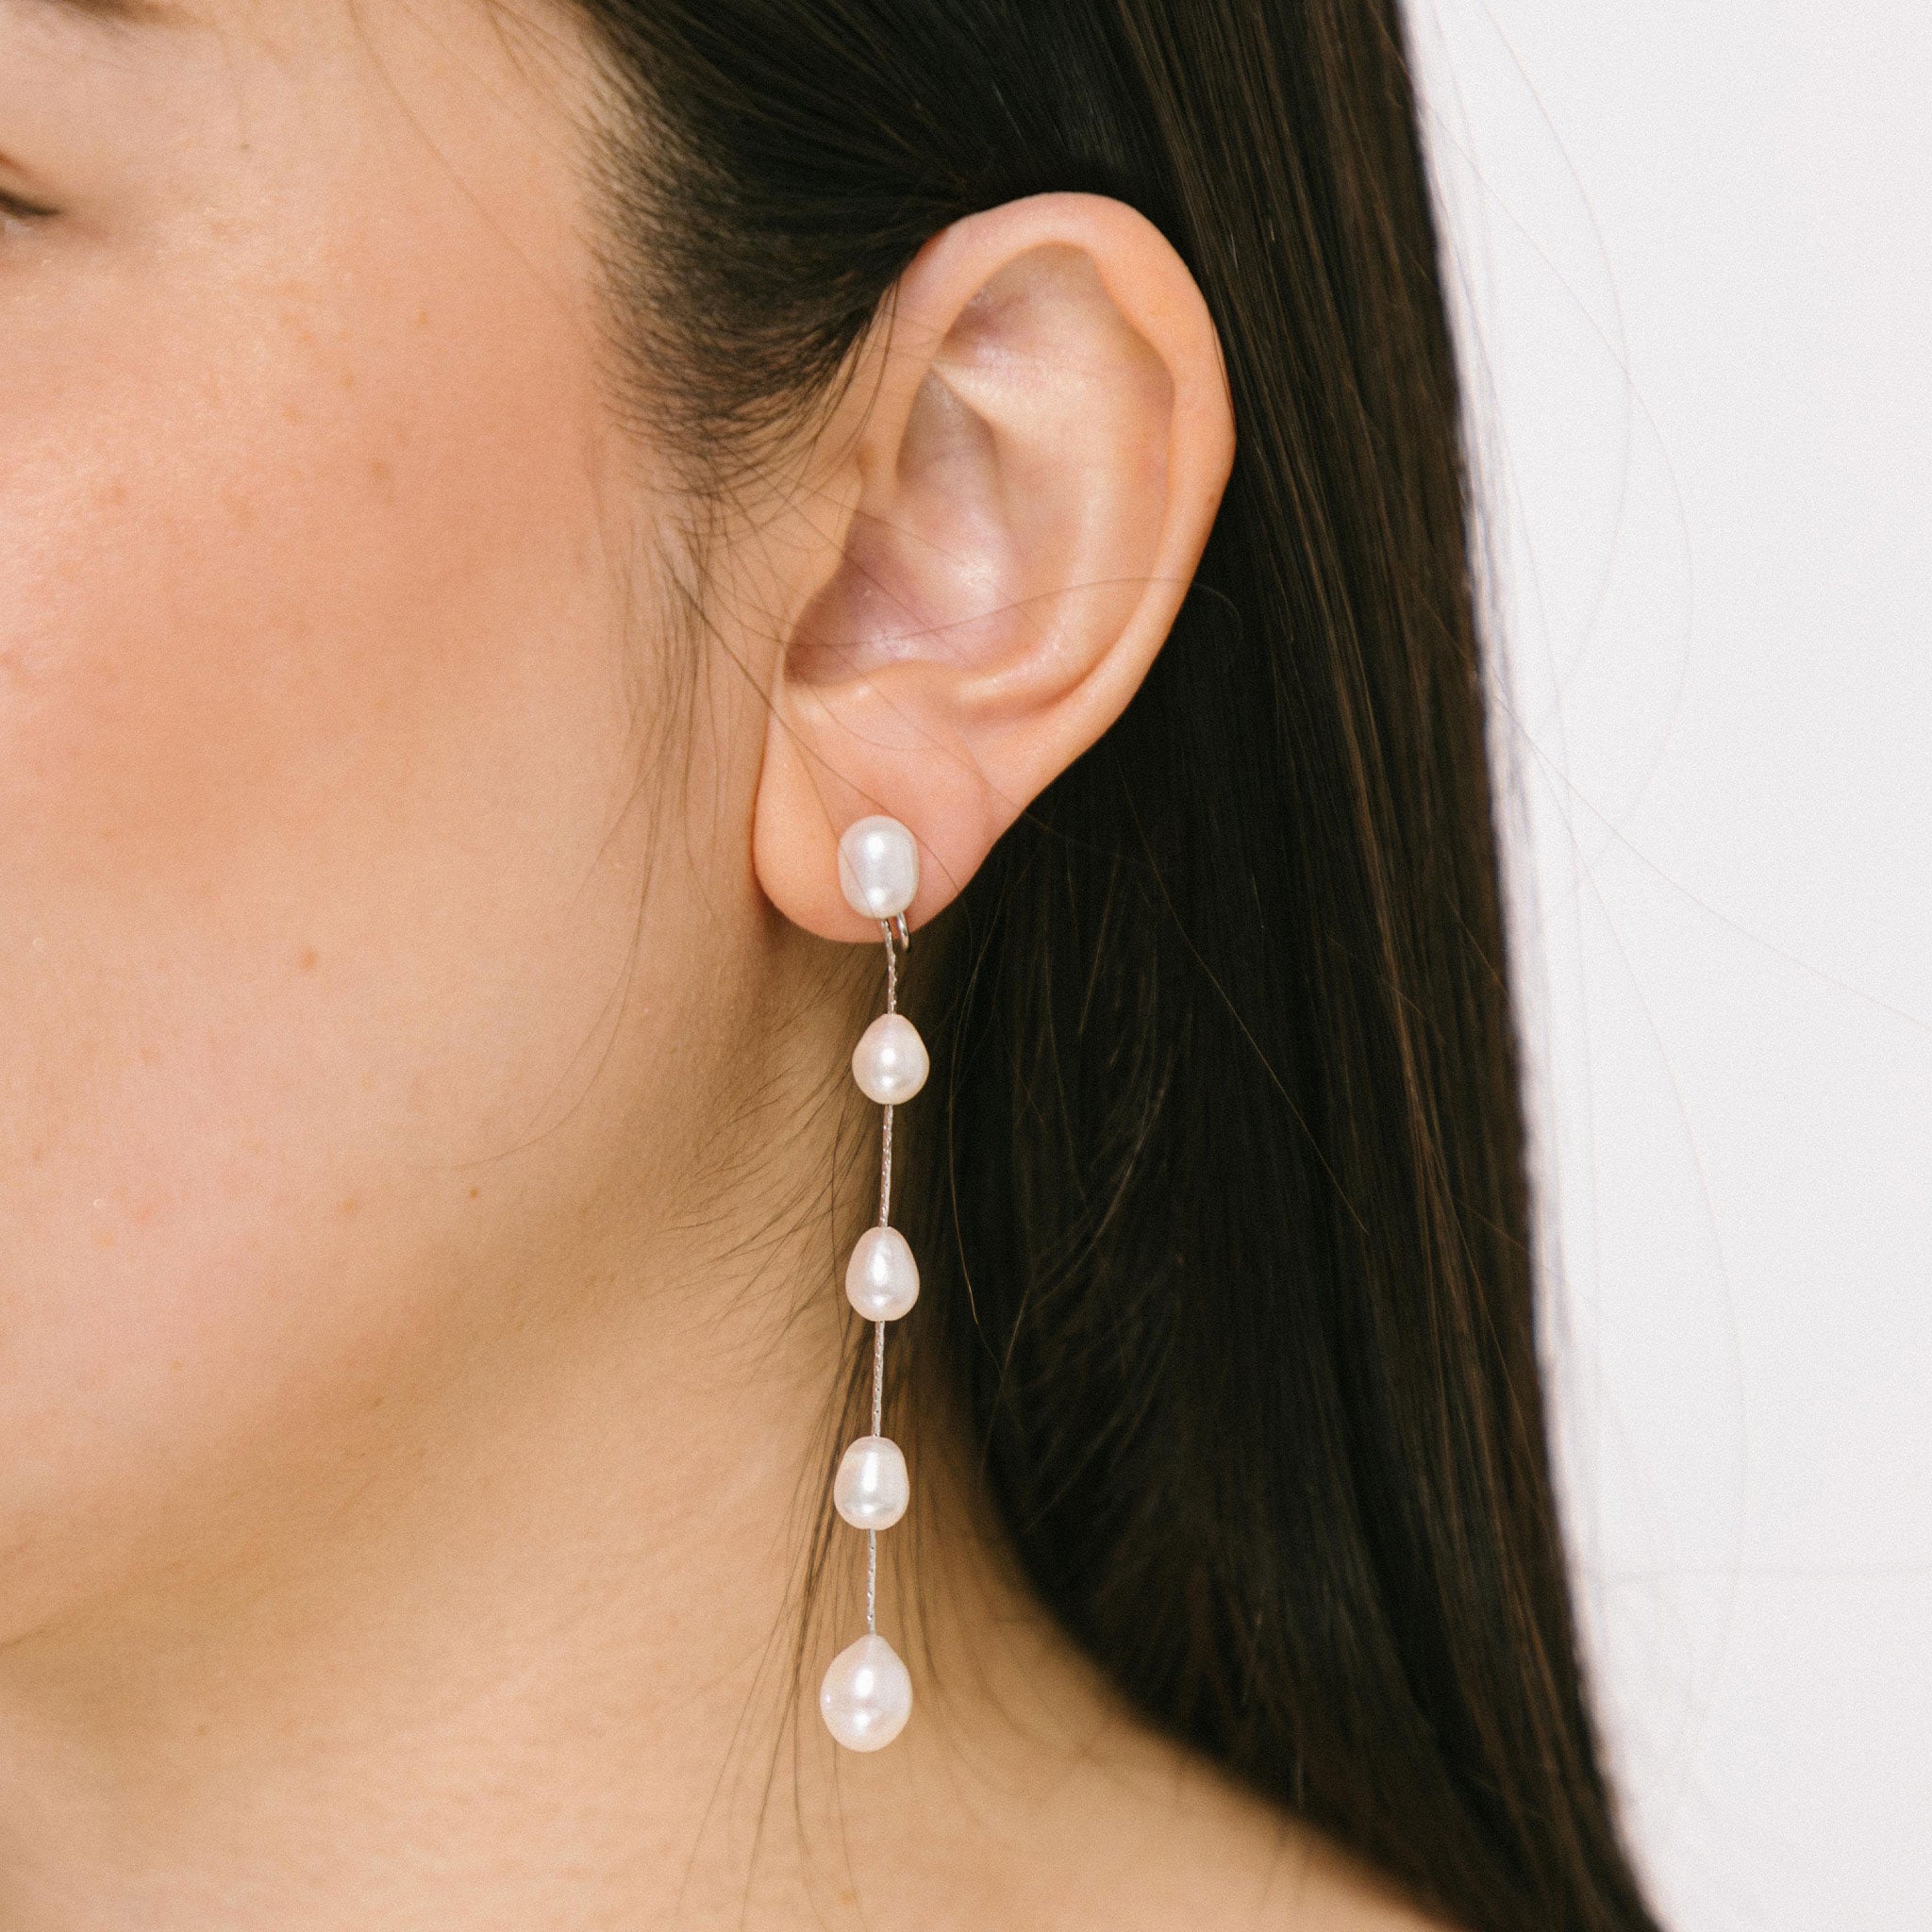 A model wearing the  Lune Pearl Clip-On Earrings in Silver with ease and comfort. Their Mosquito Coil Clip-Ons feature a medium secure hold that can be adjusted to any ear size, shape, and sensitivity-level. Crafted from Freshwater Pearls, each set exhibits its own unique color and size for a one-of-a-kind look. Long-lasting design ensures it can be worn for up to 24 hours with ease.